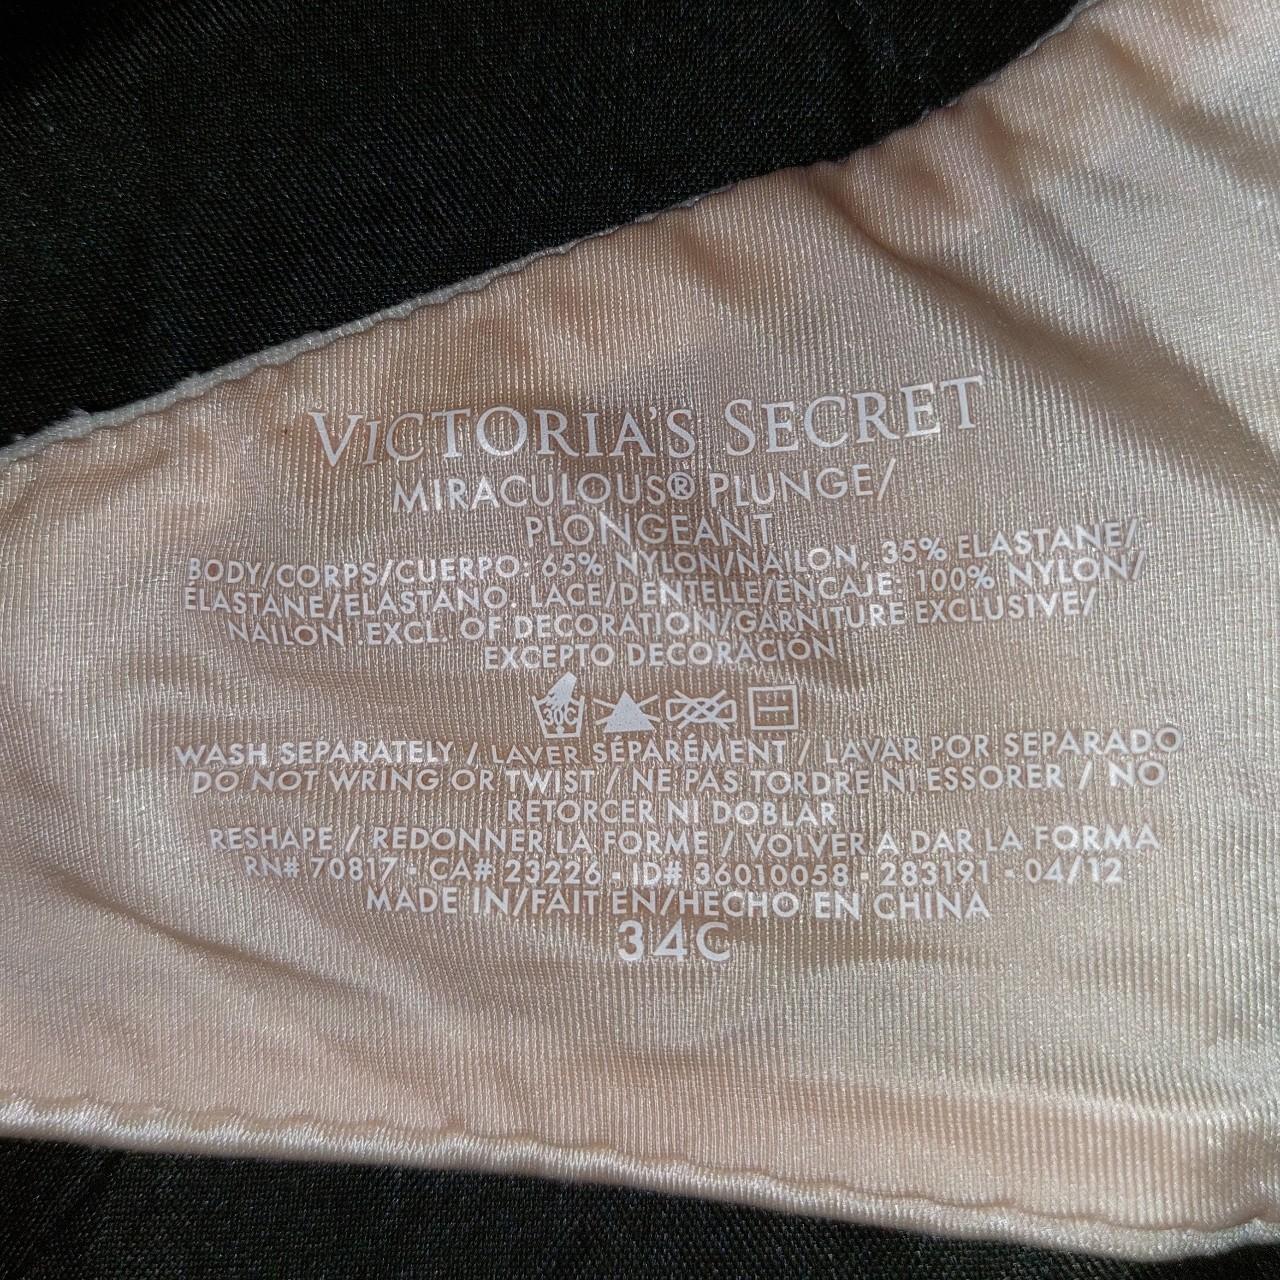 Victoria's Secret Miraculous Plunge - Nude with